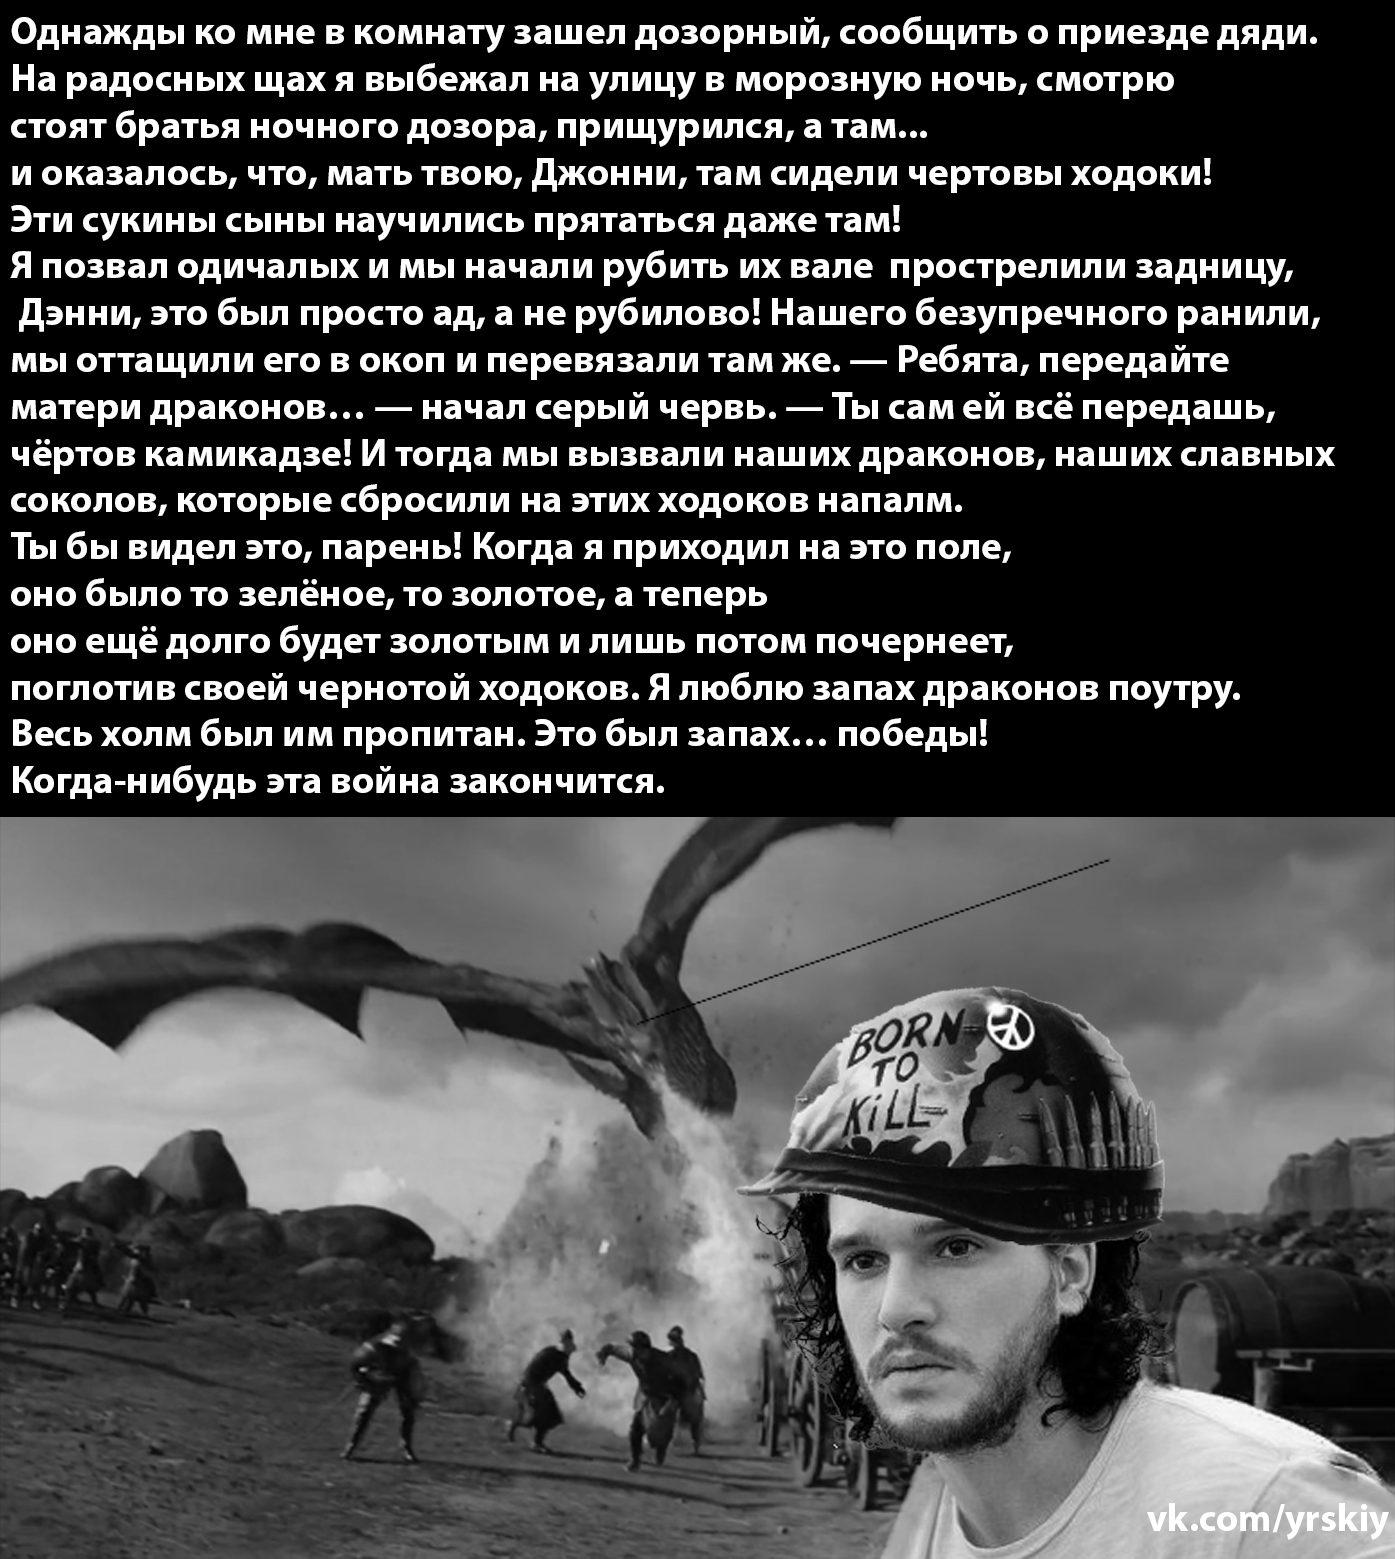 What is Martin talking about? - My, Game of Thrones, Vietnam, Serials